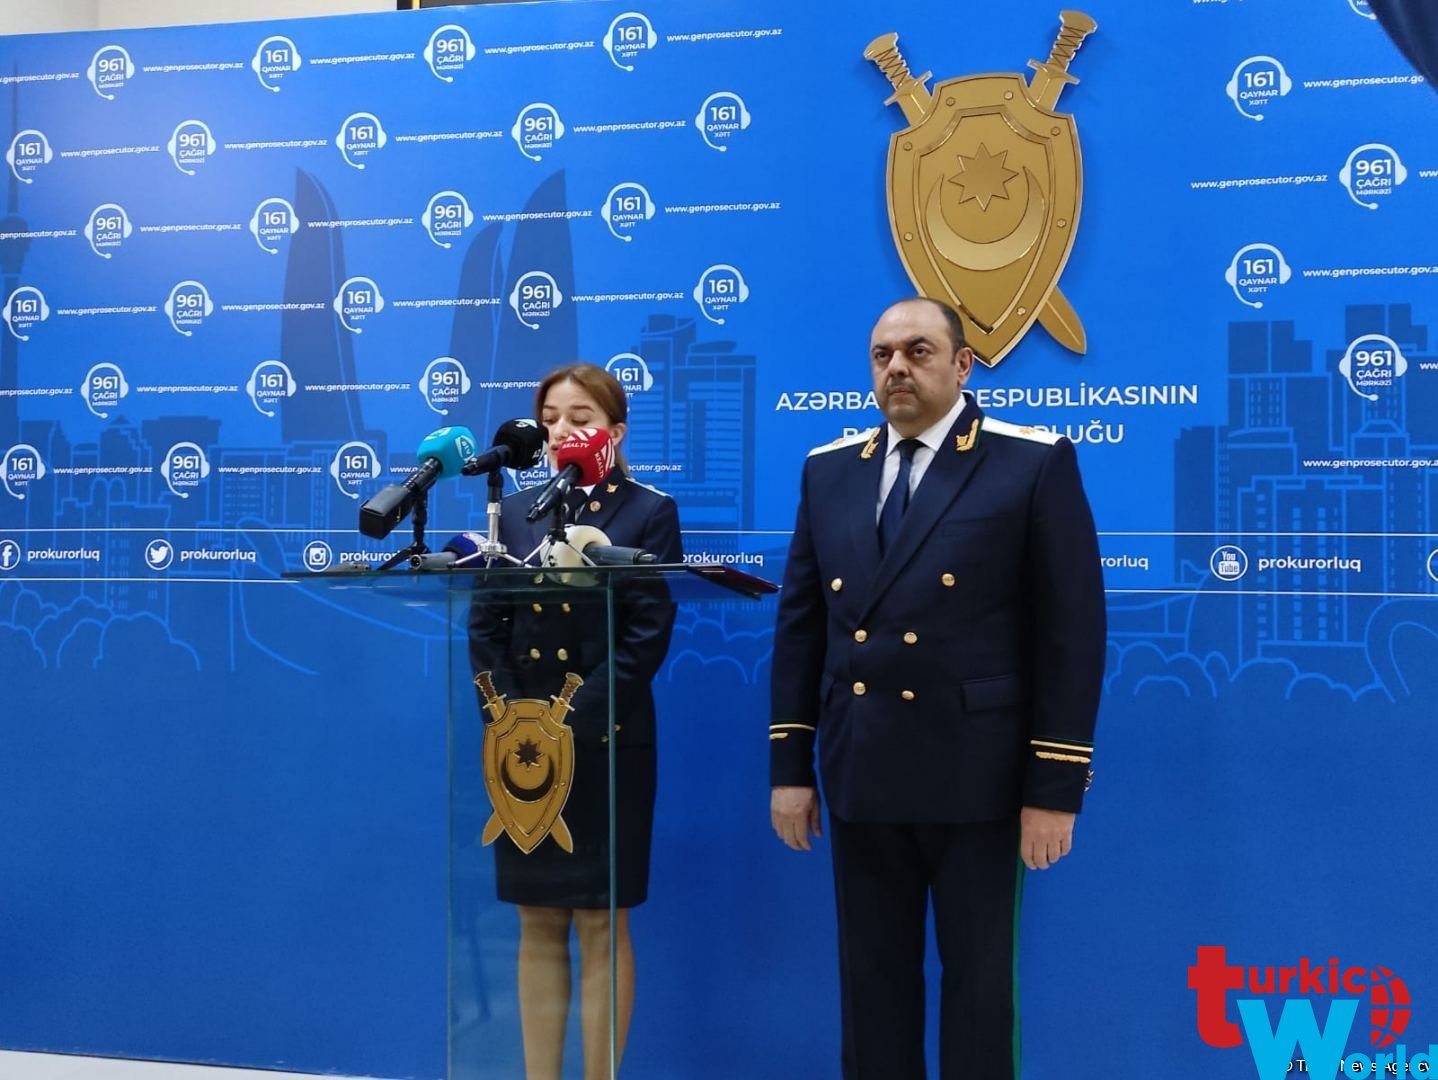 Witnesses of helicopter crash being questioned in Azerbaijan – First Deputy Prosecutor General